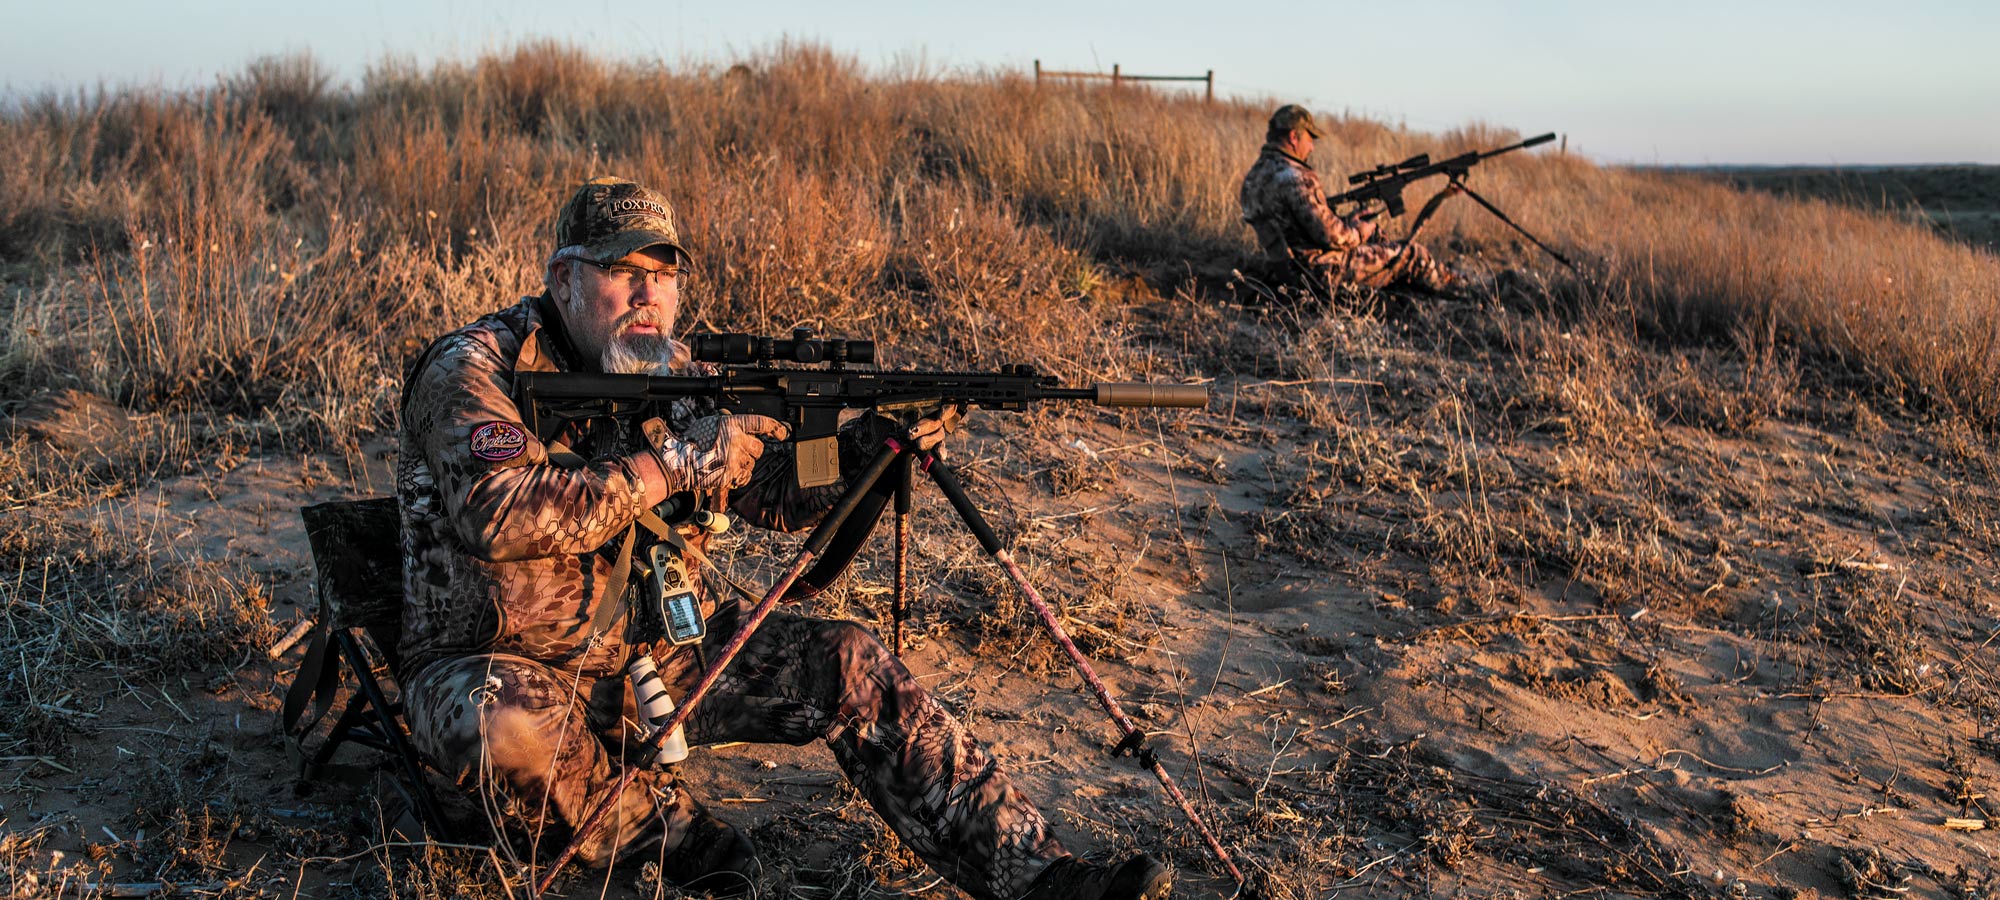 Morris and Young hunting coyotes in Nebraska